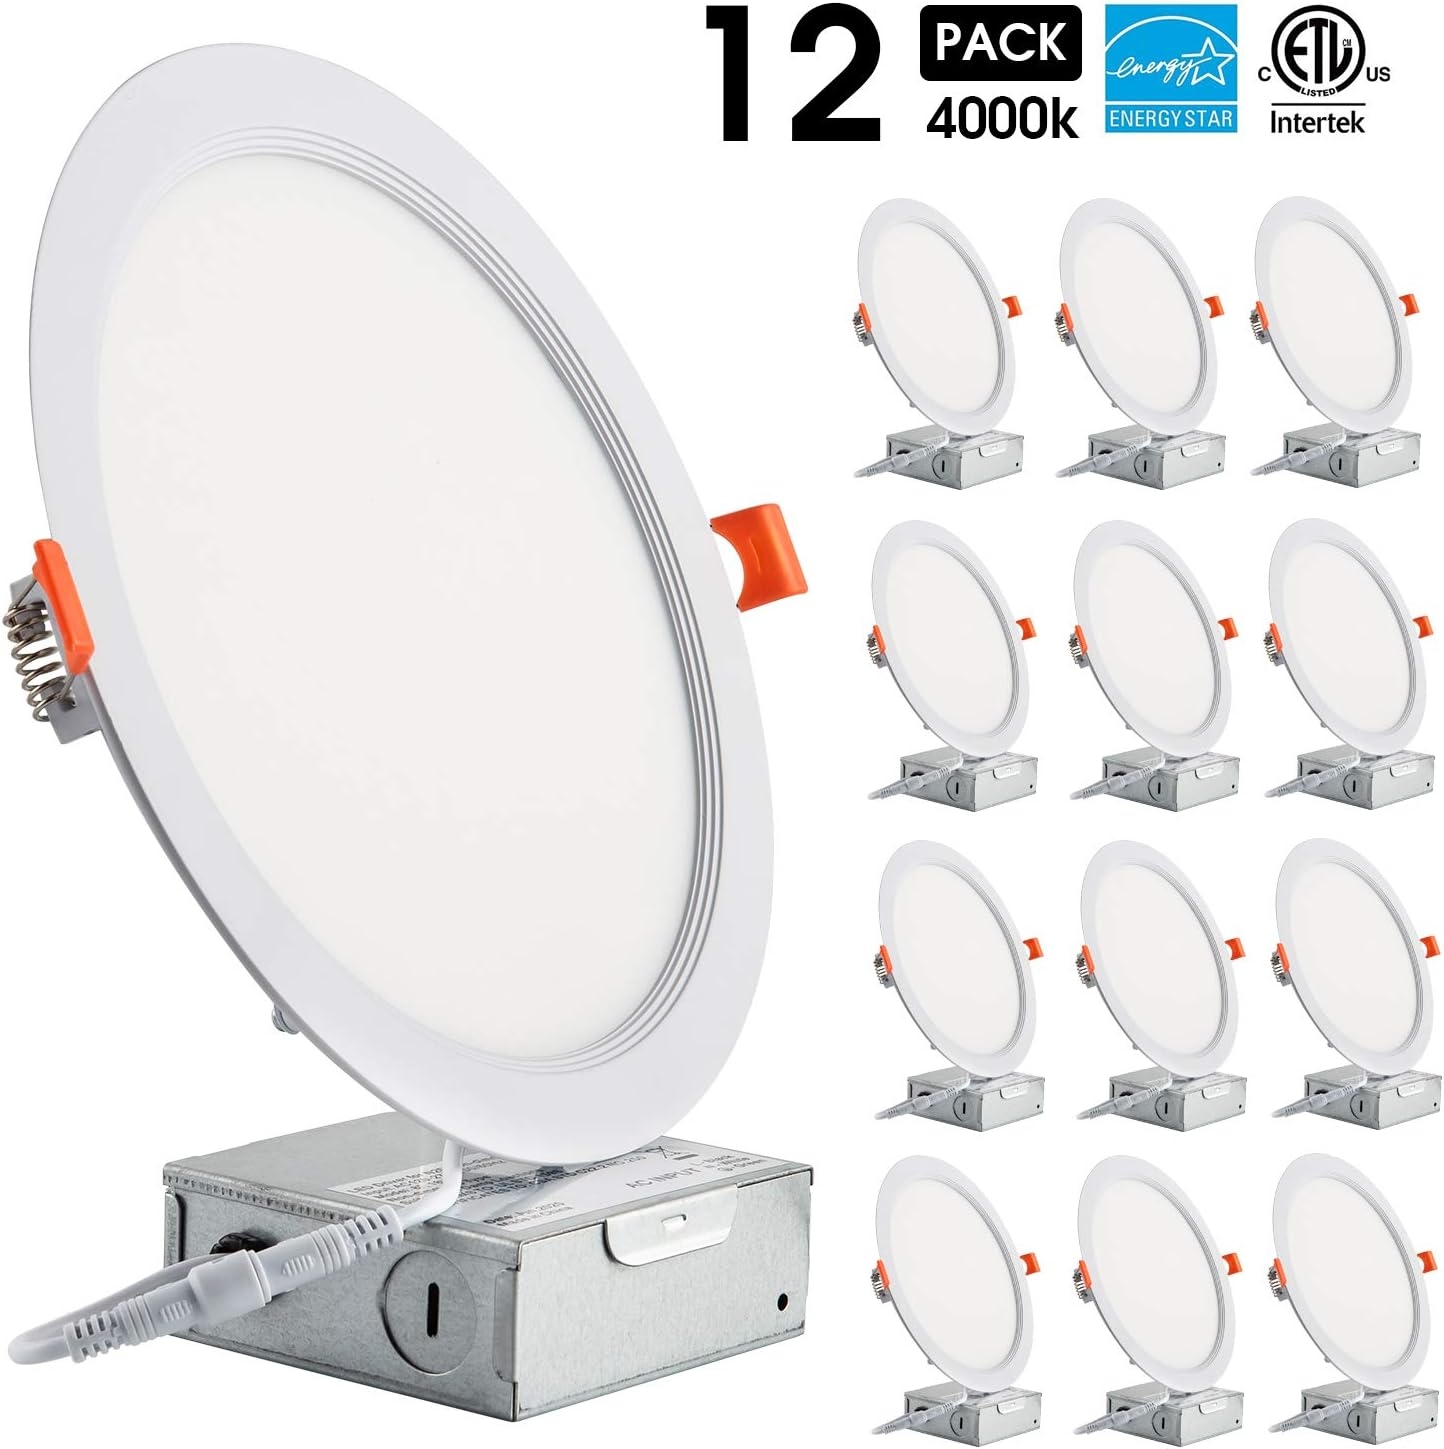 8 Inch Ultra Thin LED Panel Lighting,4000K Neutral White Recessed Ceiling Lighting, 1800LM UL Listed Cable Housing & Trim Kits Downlight（12 Pack ）